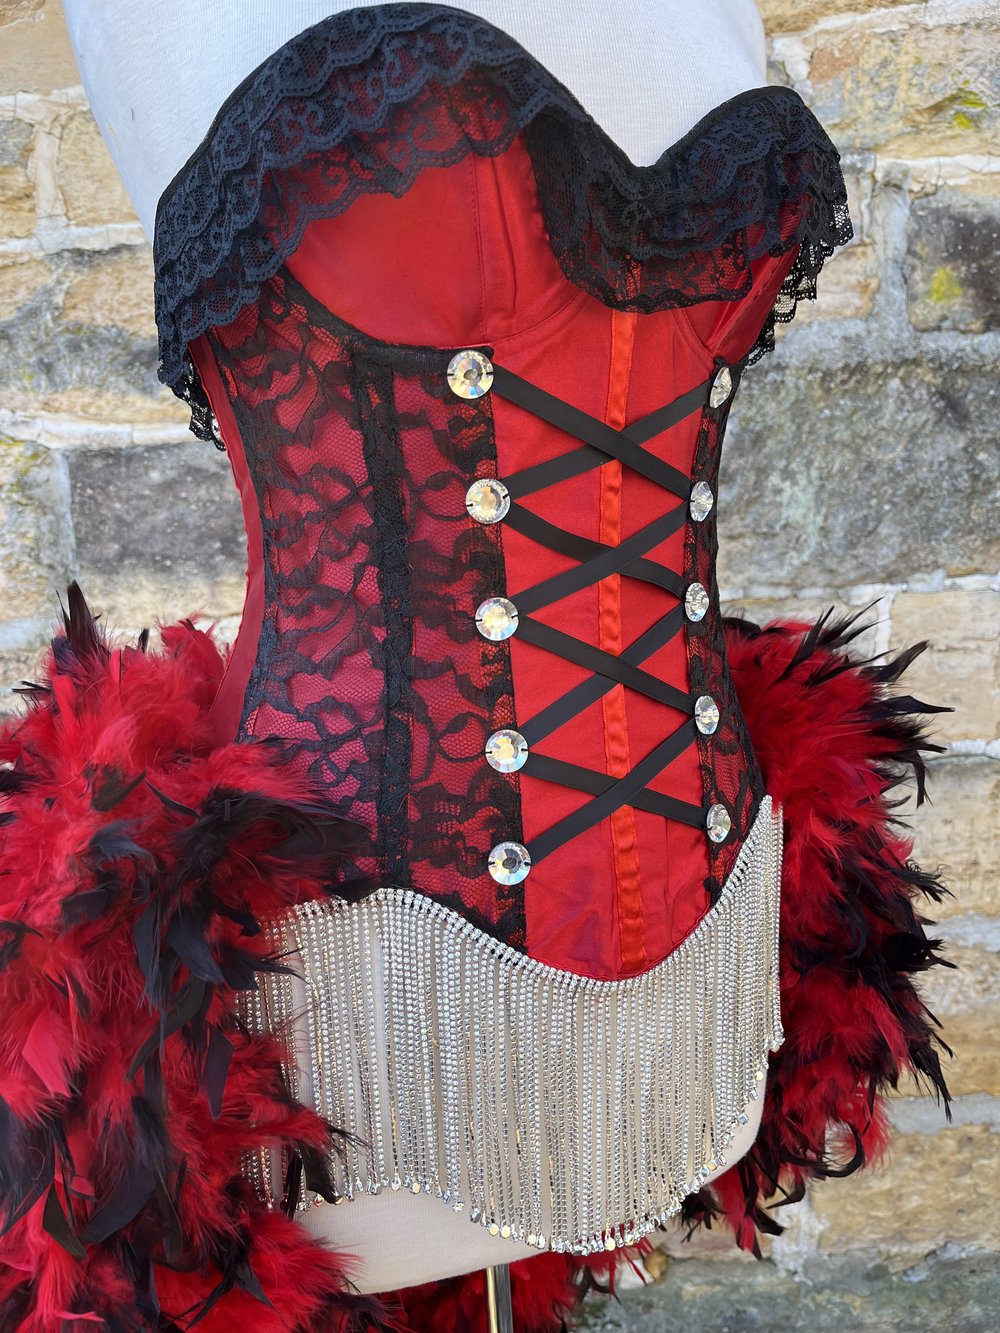 One Only-L-Custom Burlesque Costume Red/Black with Rhinestone